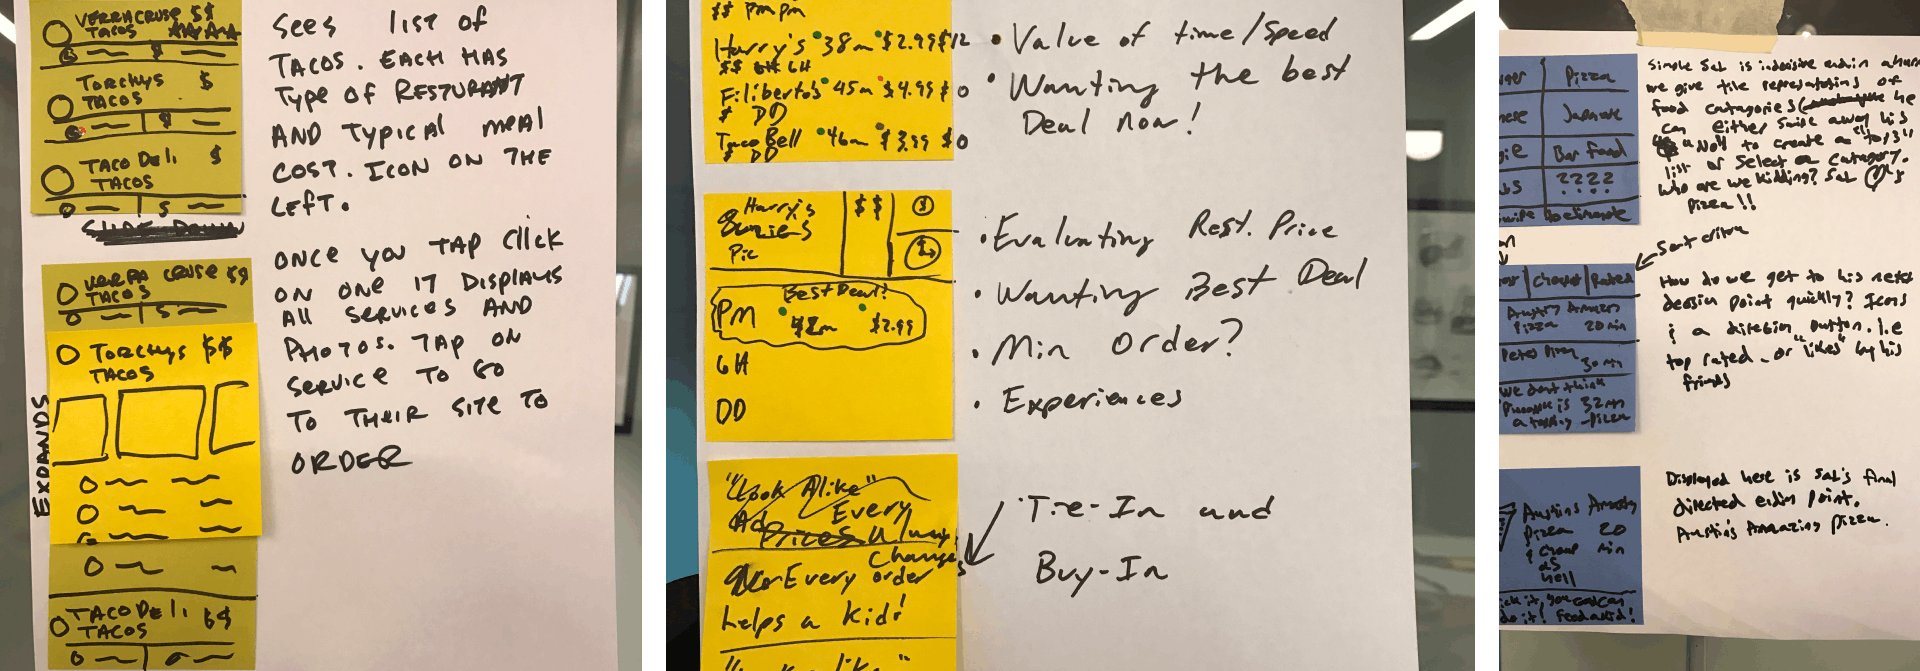 Three photos of design sprint storyboards, sketches on stickies and notes, next to each other